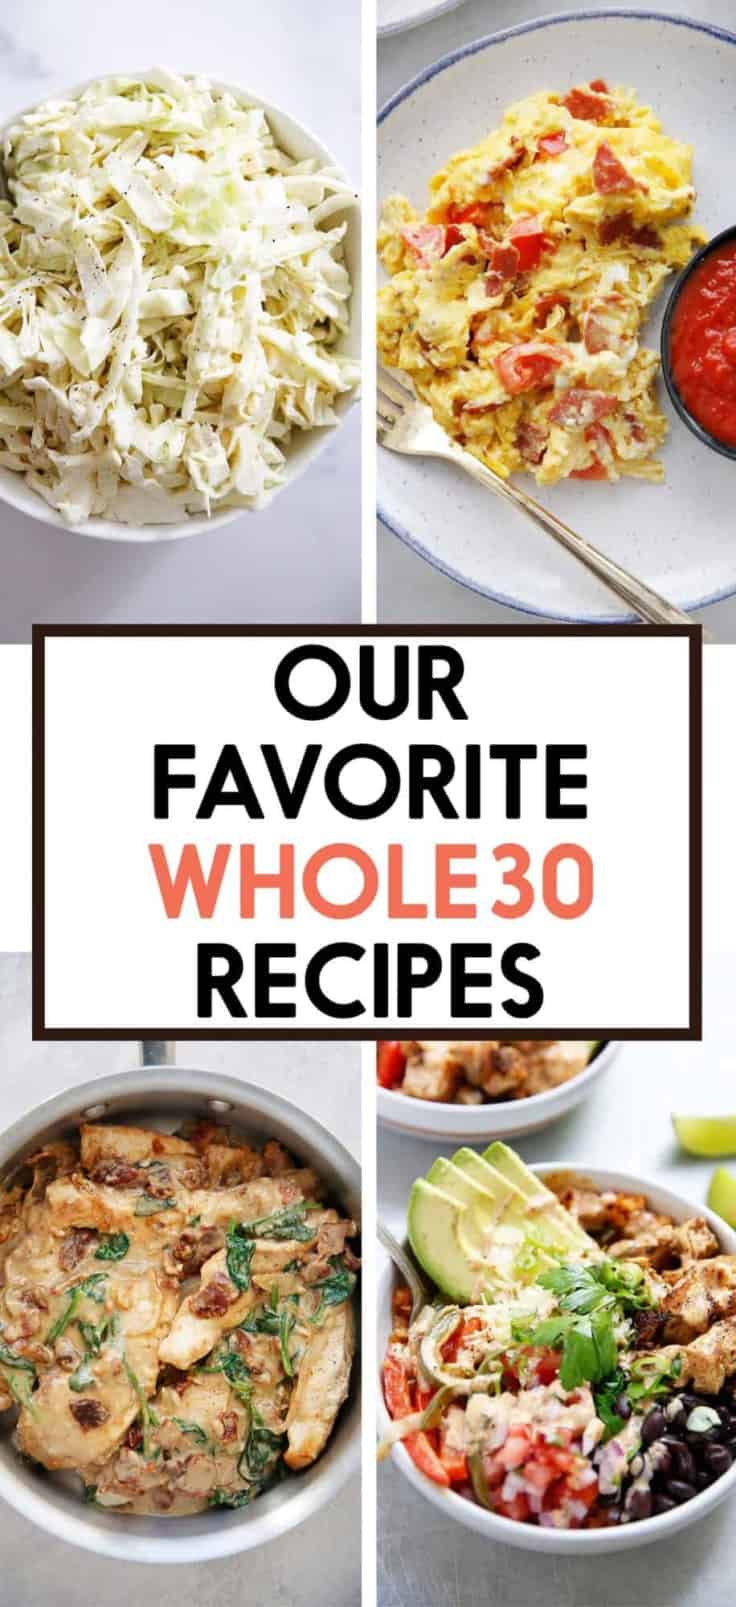 Our Favorite Whole30 Recipes